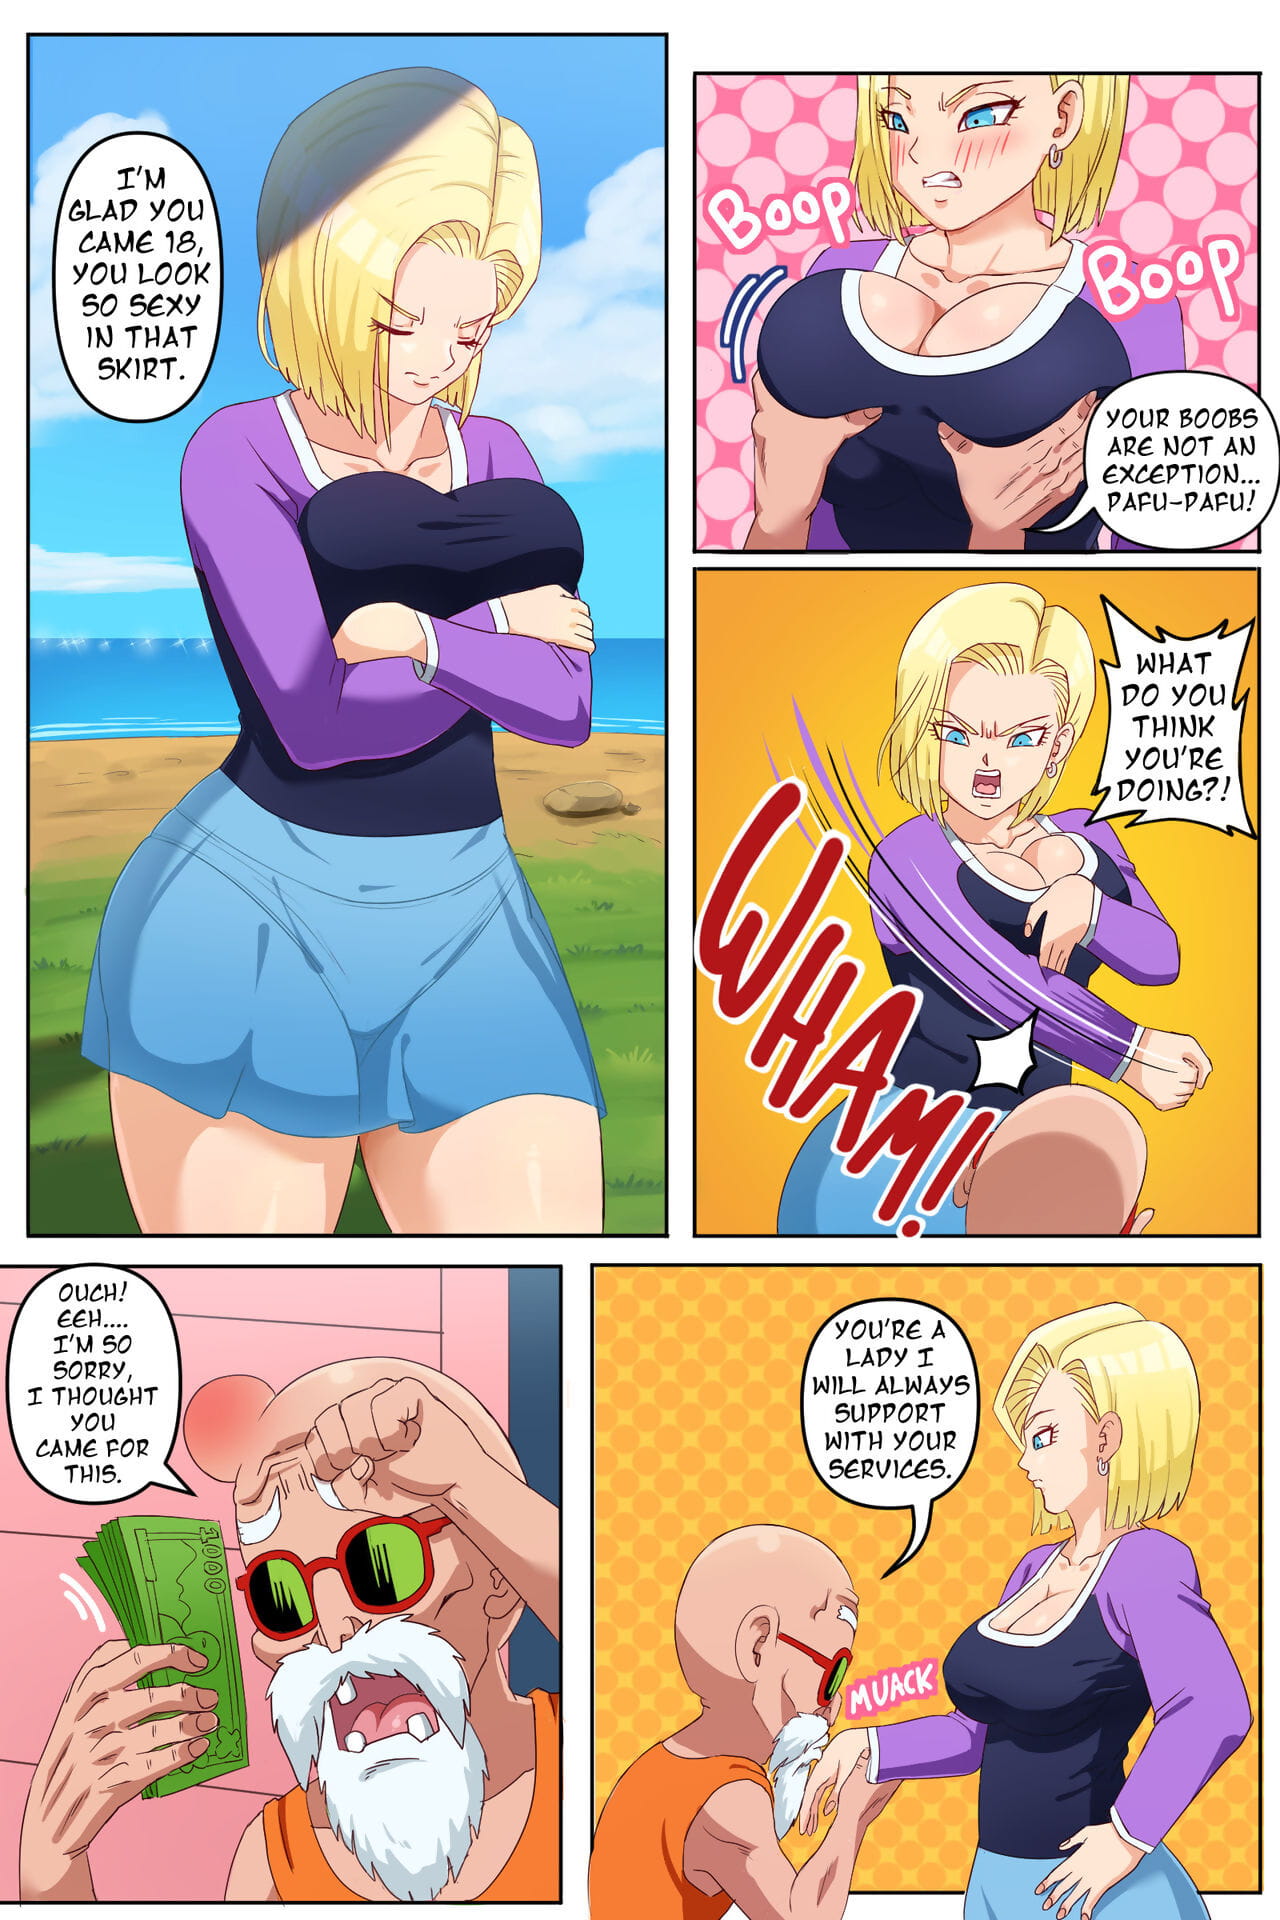 Dragonball Super- PinkPawg – Android 18 NTR – Ep 1 page 1